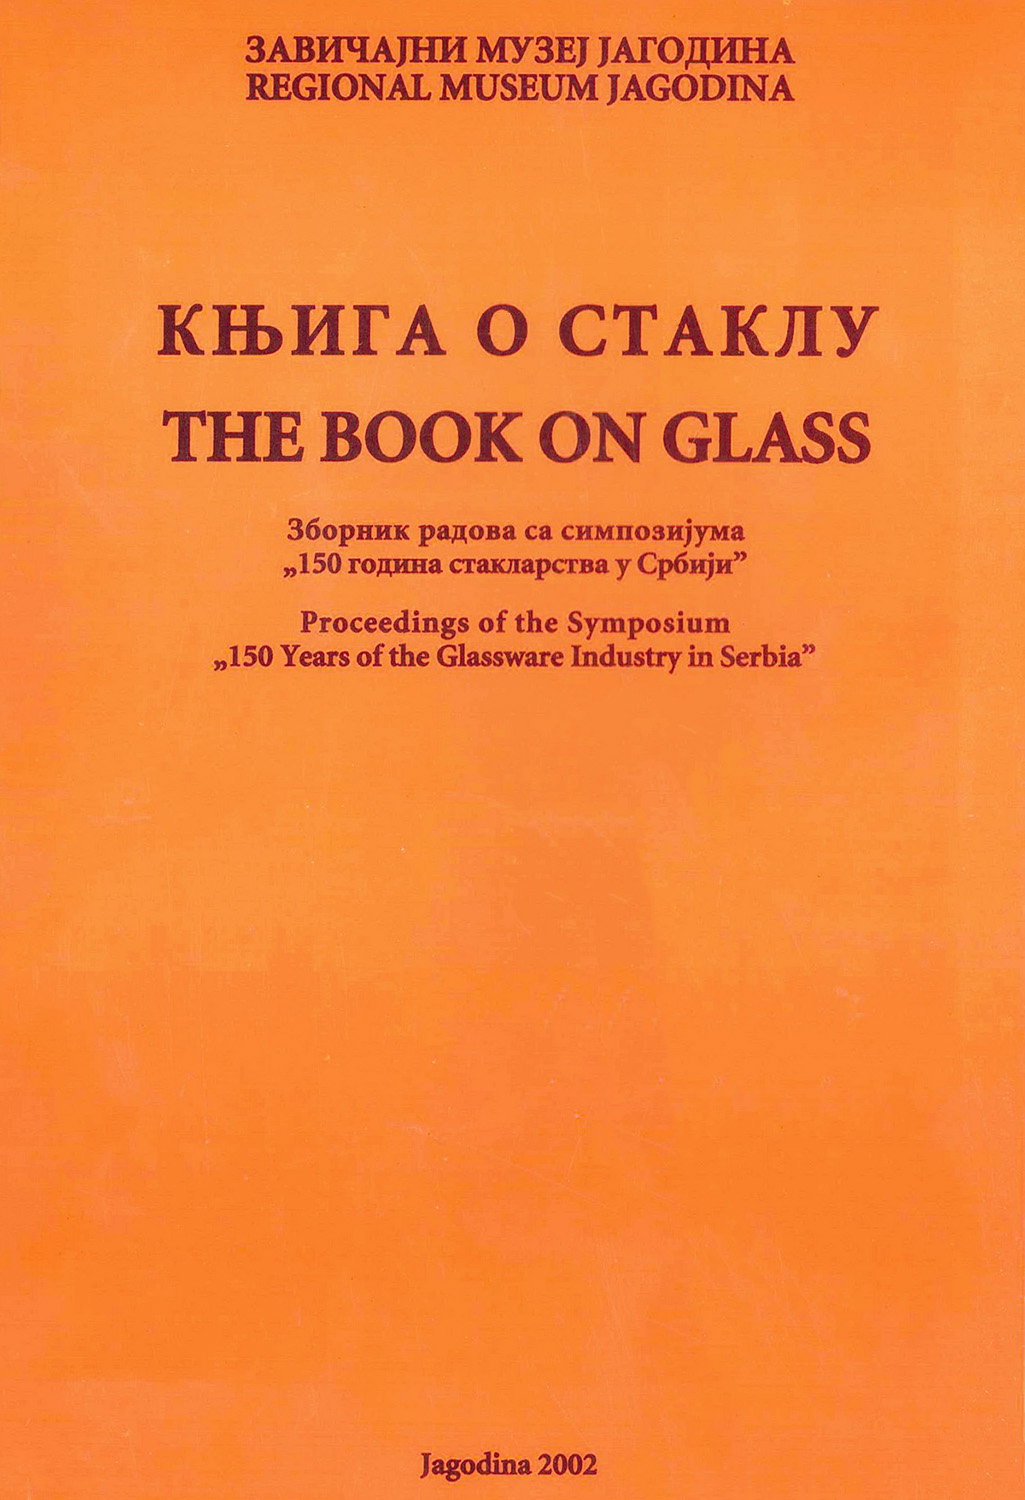 The book on glass: Proceedings of the Symposium “150 Years of the Glassware Industry in Serbia”